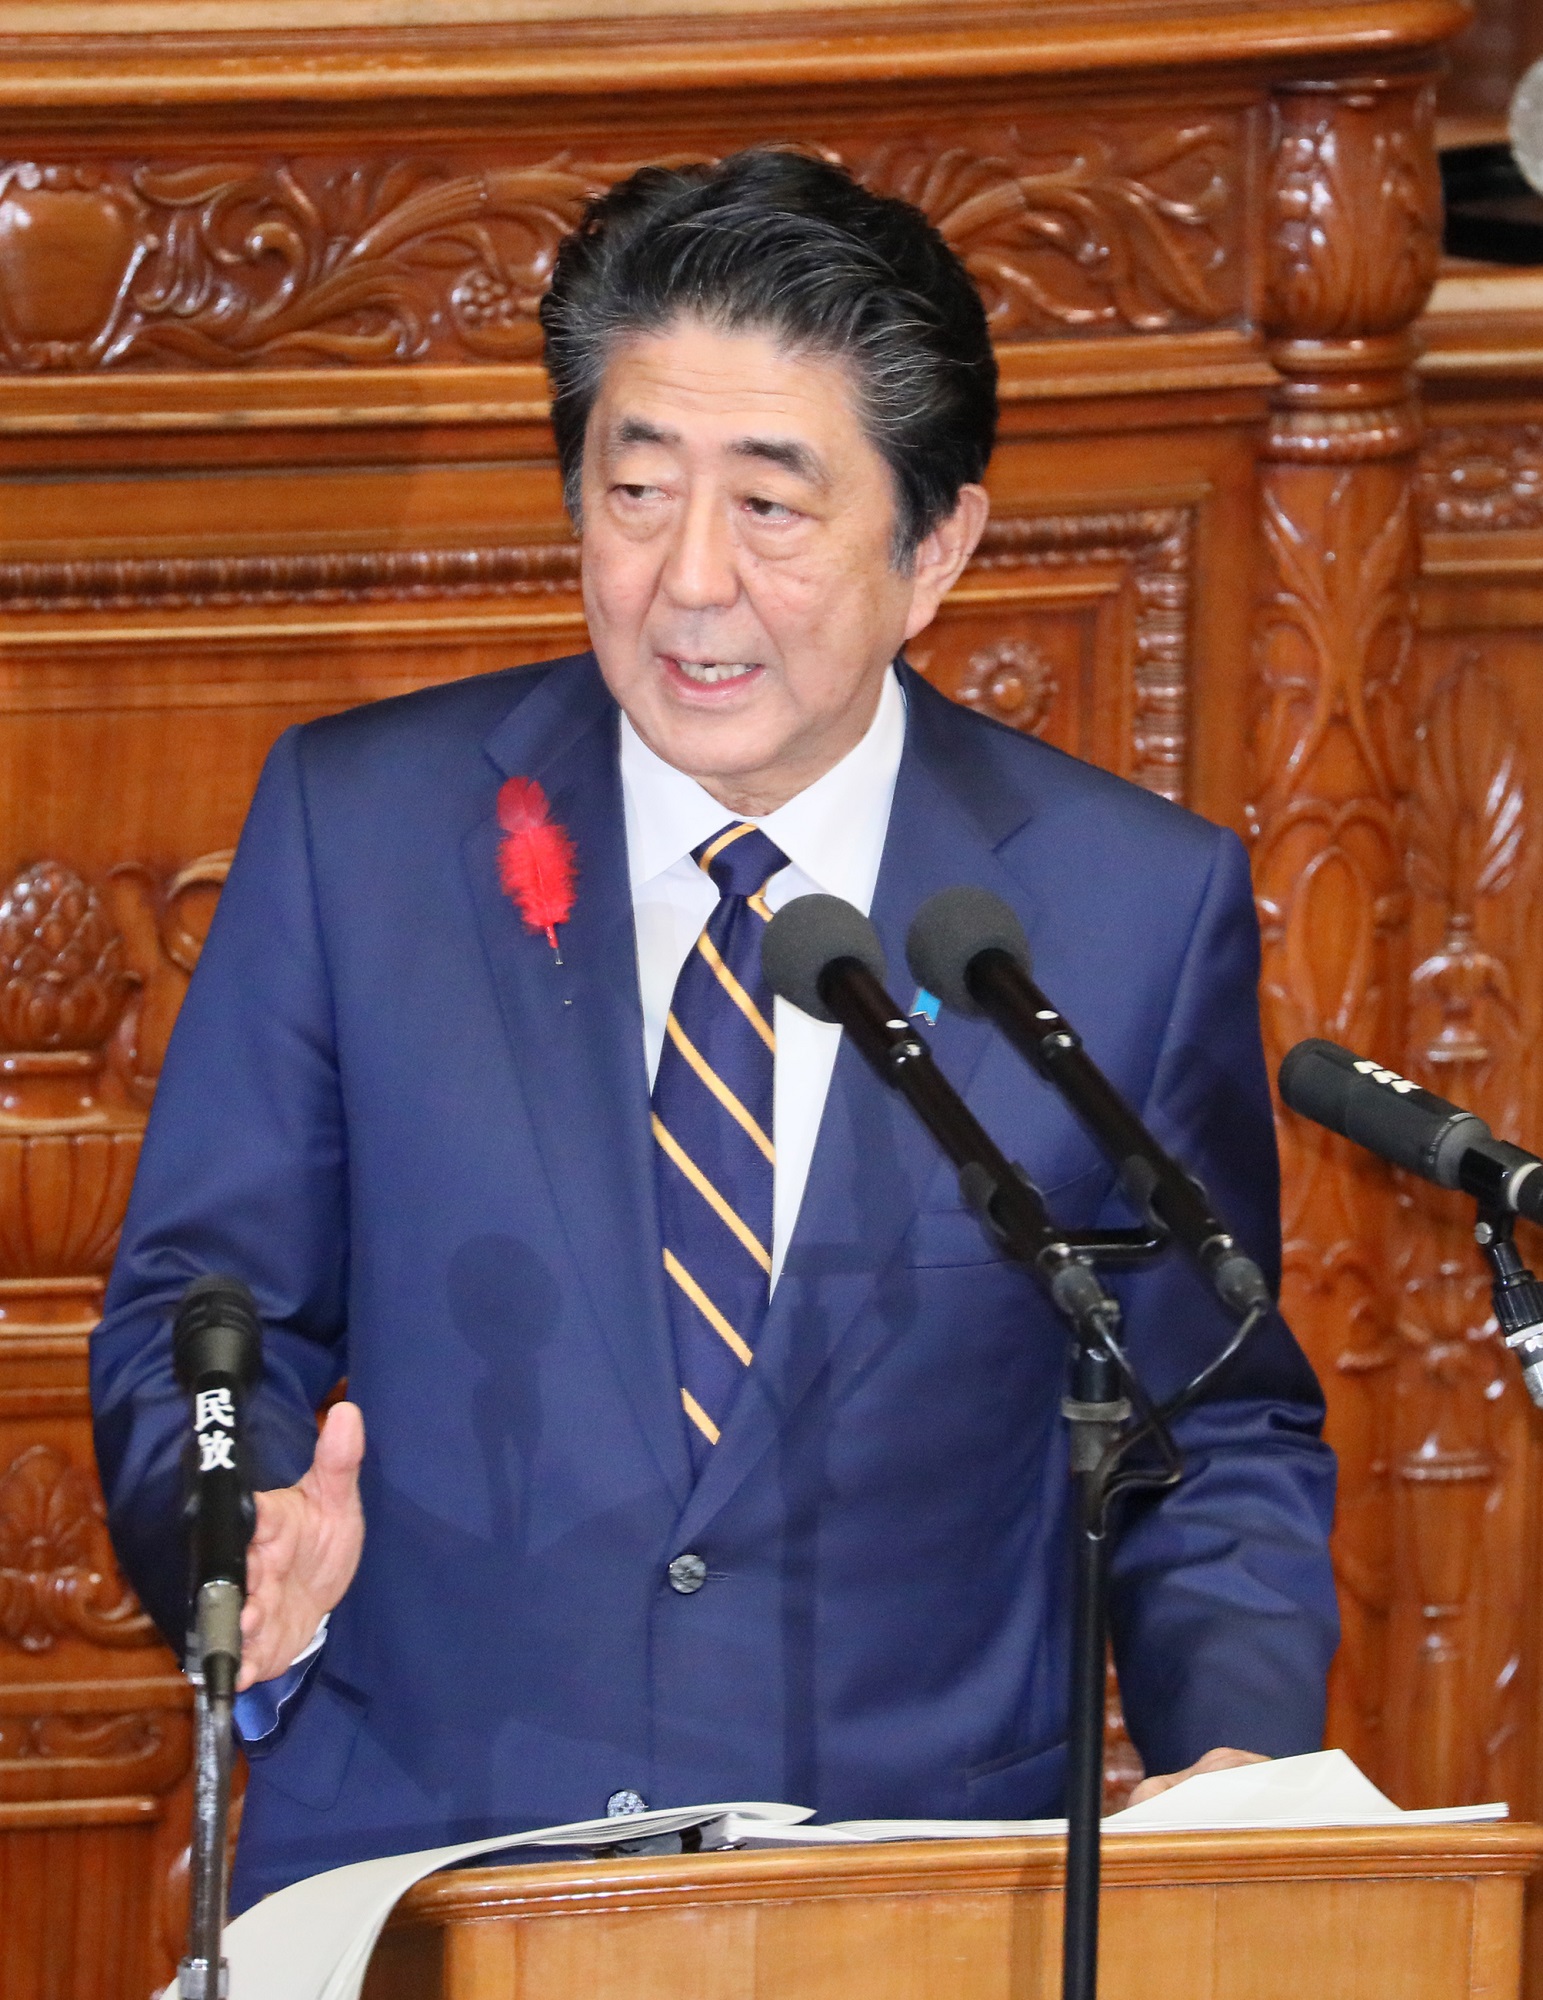 Photograph of the Prime Minister delivering a policy speech during the plenary session of the House of Representatives (5)